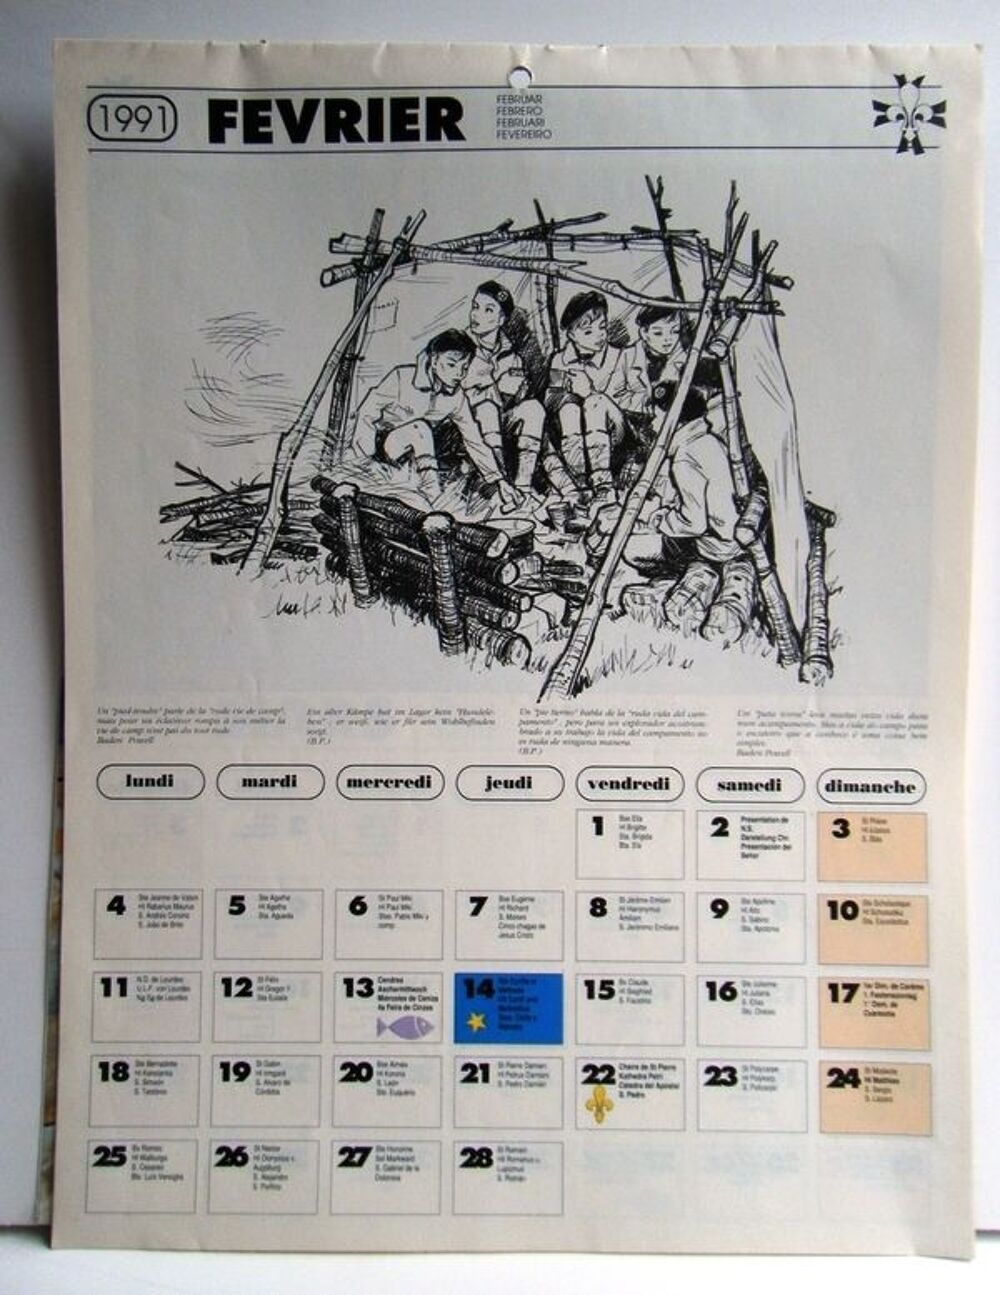 CALENDRIER 1991 GUIDES &amp; SCOUTS D'EUROPE 